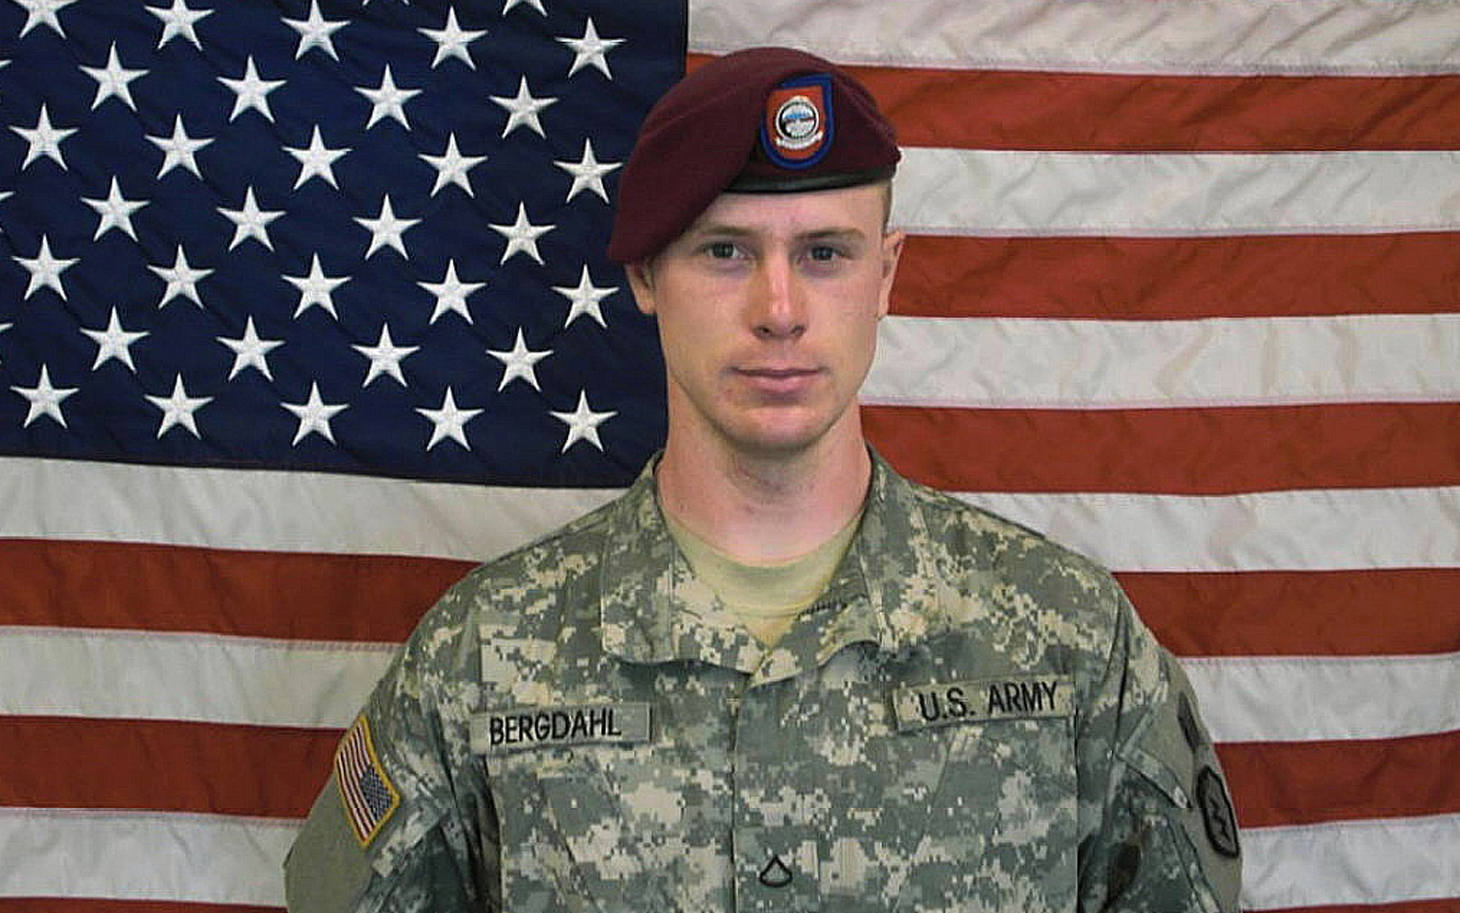 Is there a case for desertion against Bergdahl?